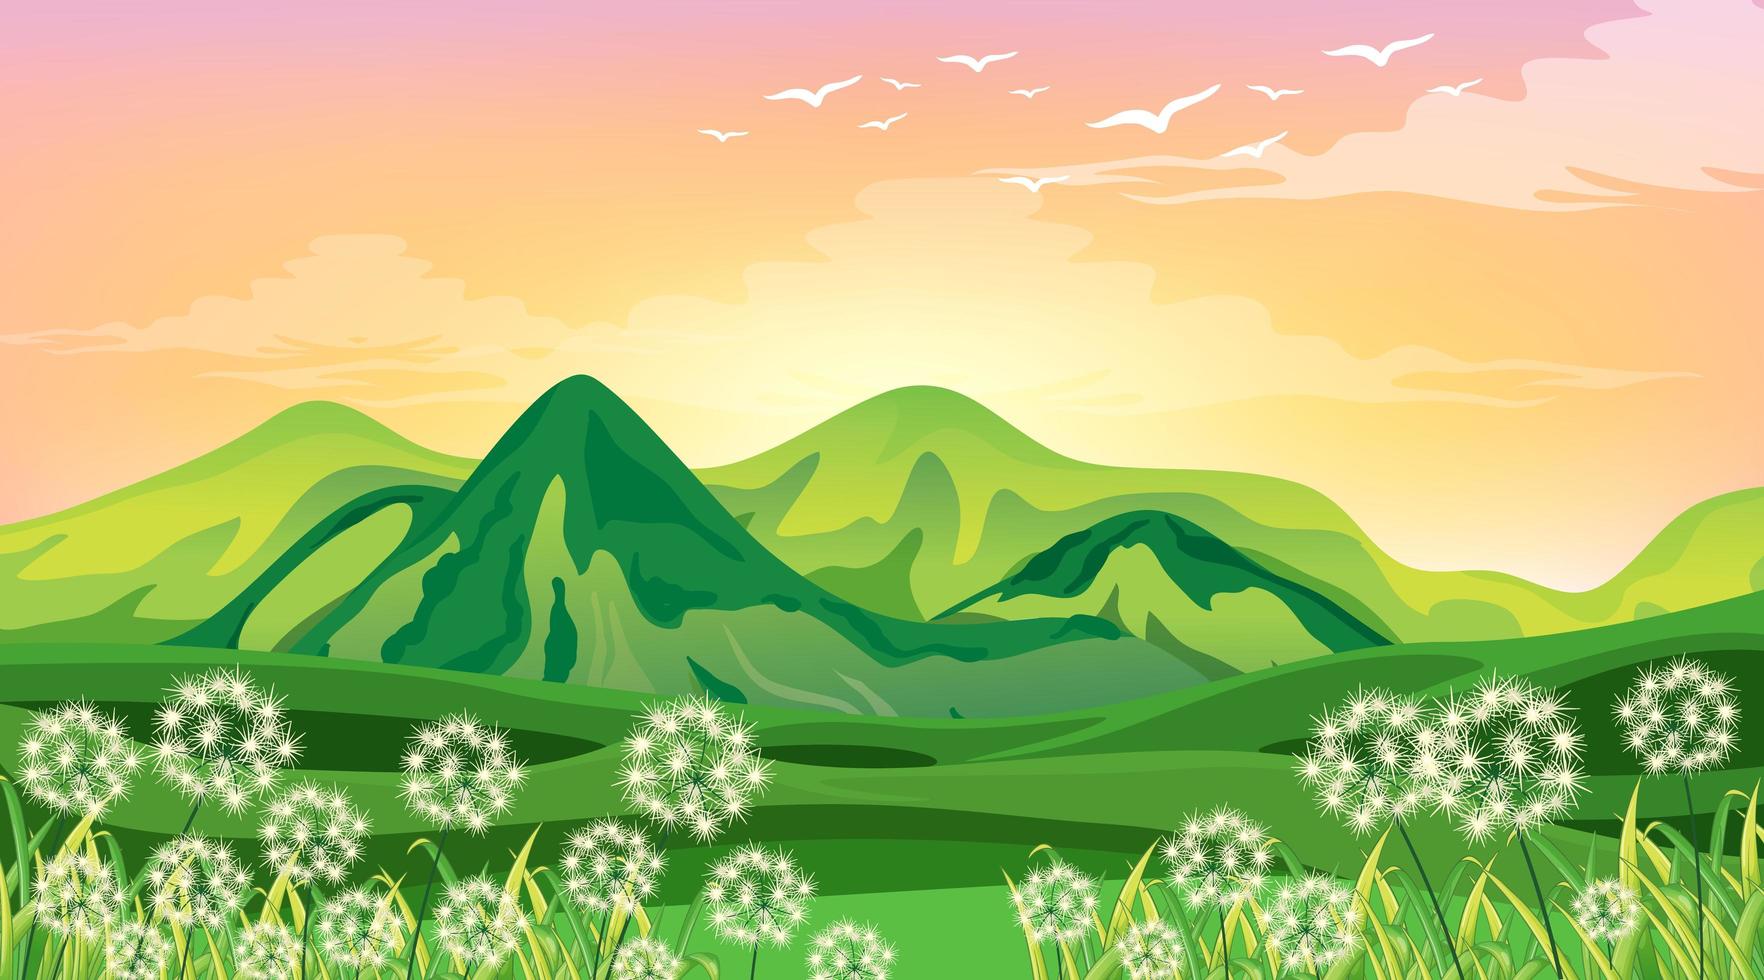 Scene with green mountains and field at sunset vector